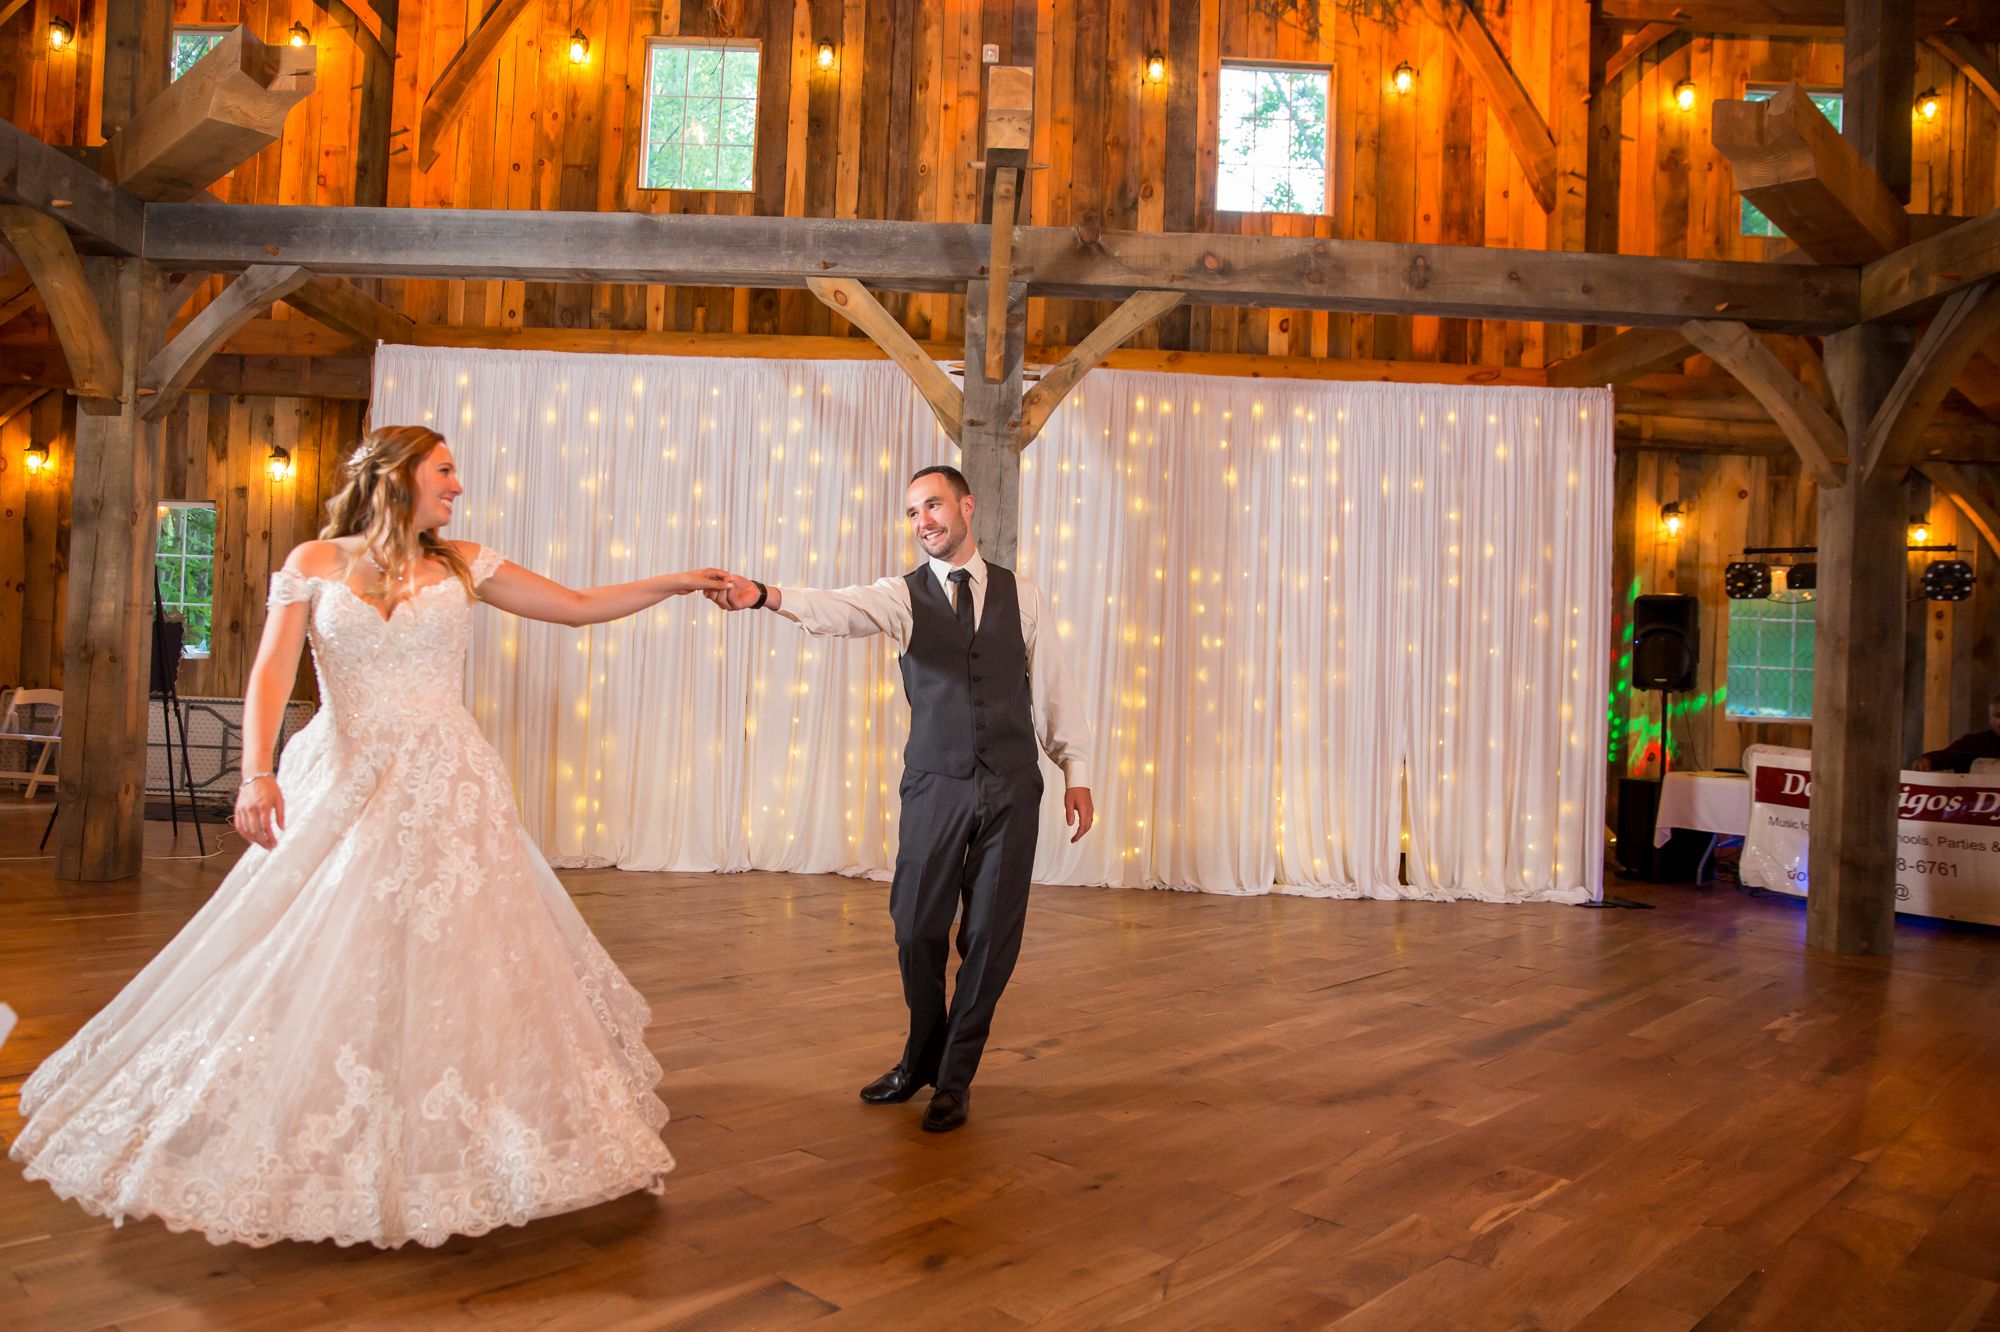 Bride and groom's first dance at their wedding at The Swan Barn Door